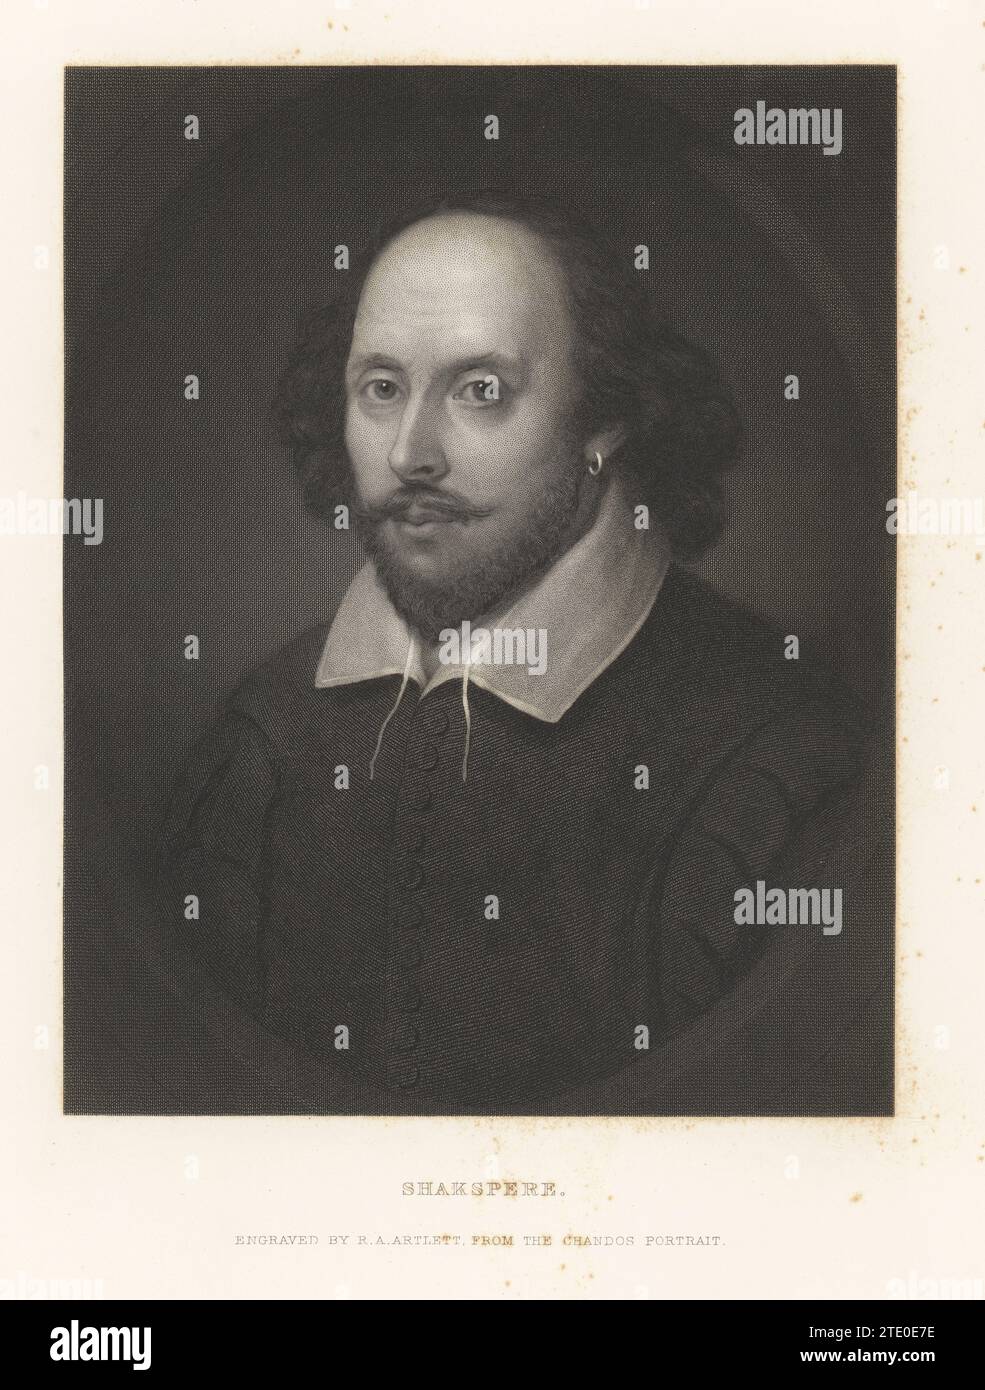 Steel engraving by Richard Austin Artlett from the Chandos portrait of Shakspere (William Shakespeare) in The Works of Shakespeare, edited by Charles Knight, Virtue & Yorston, New York, 1880. Stock Photo